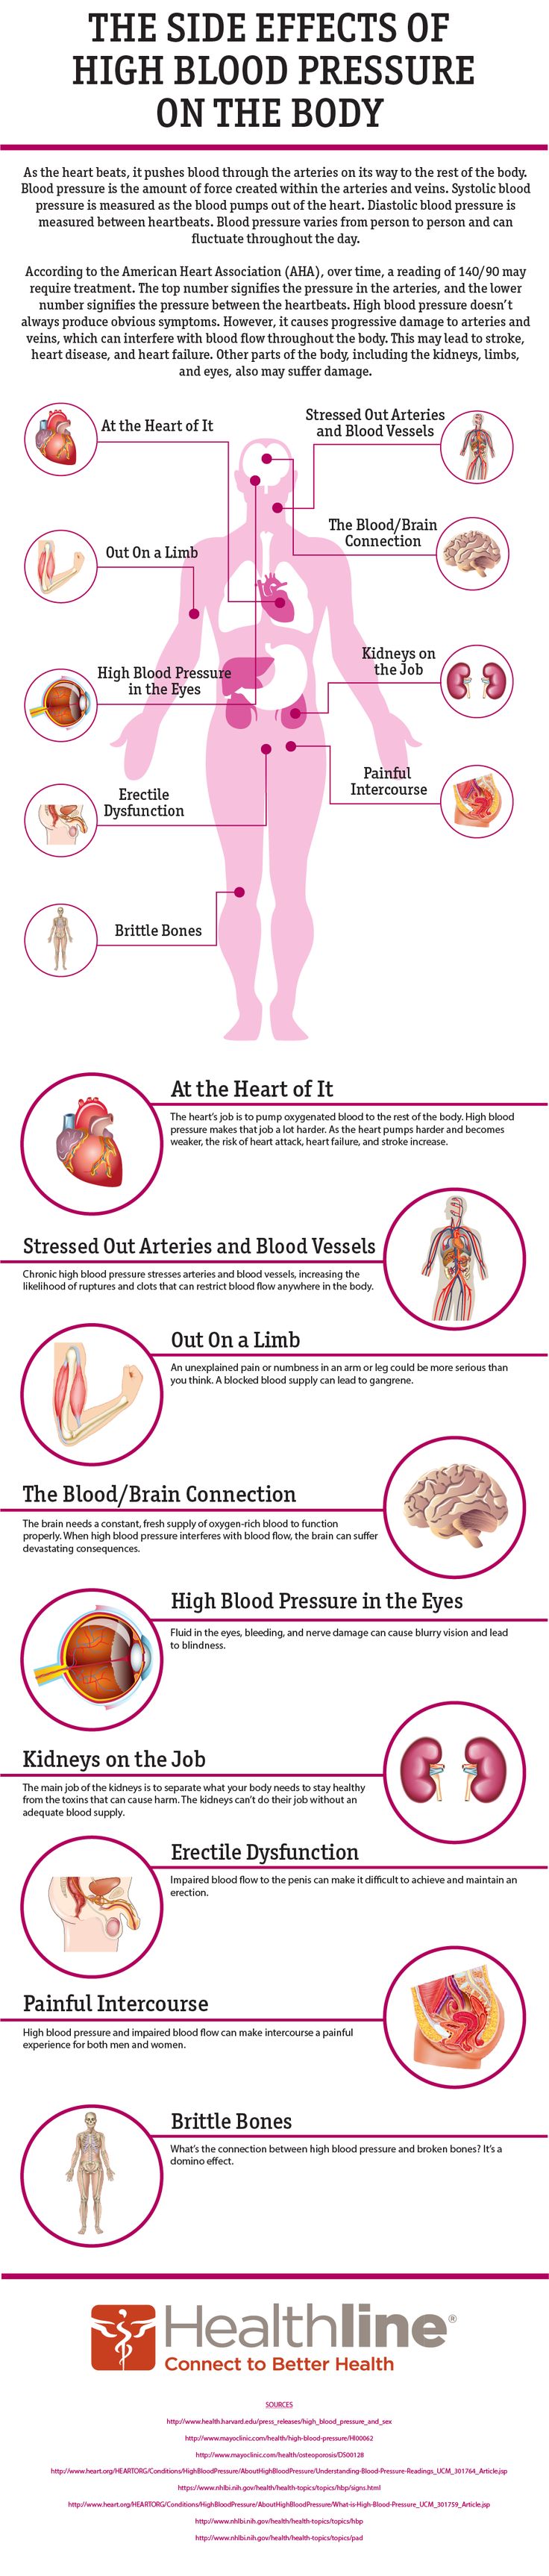 effects-of-high-blood-pressure